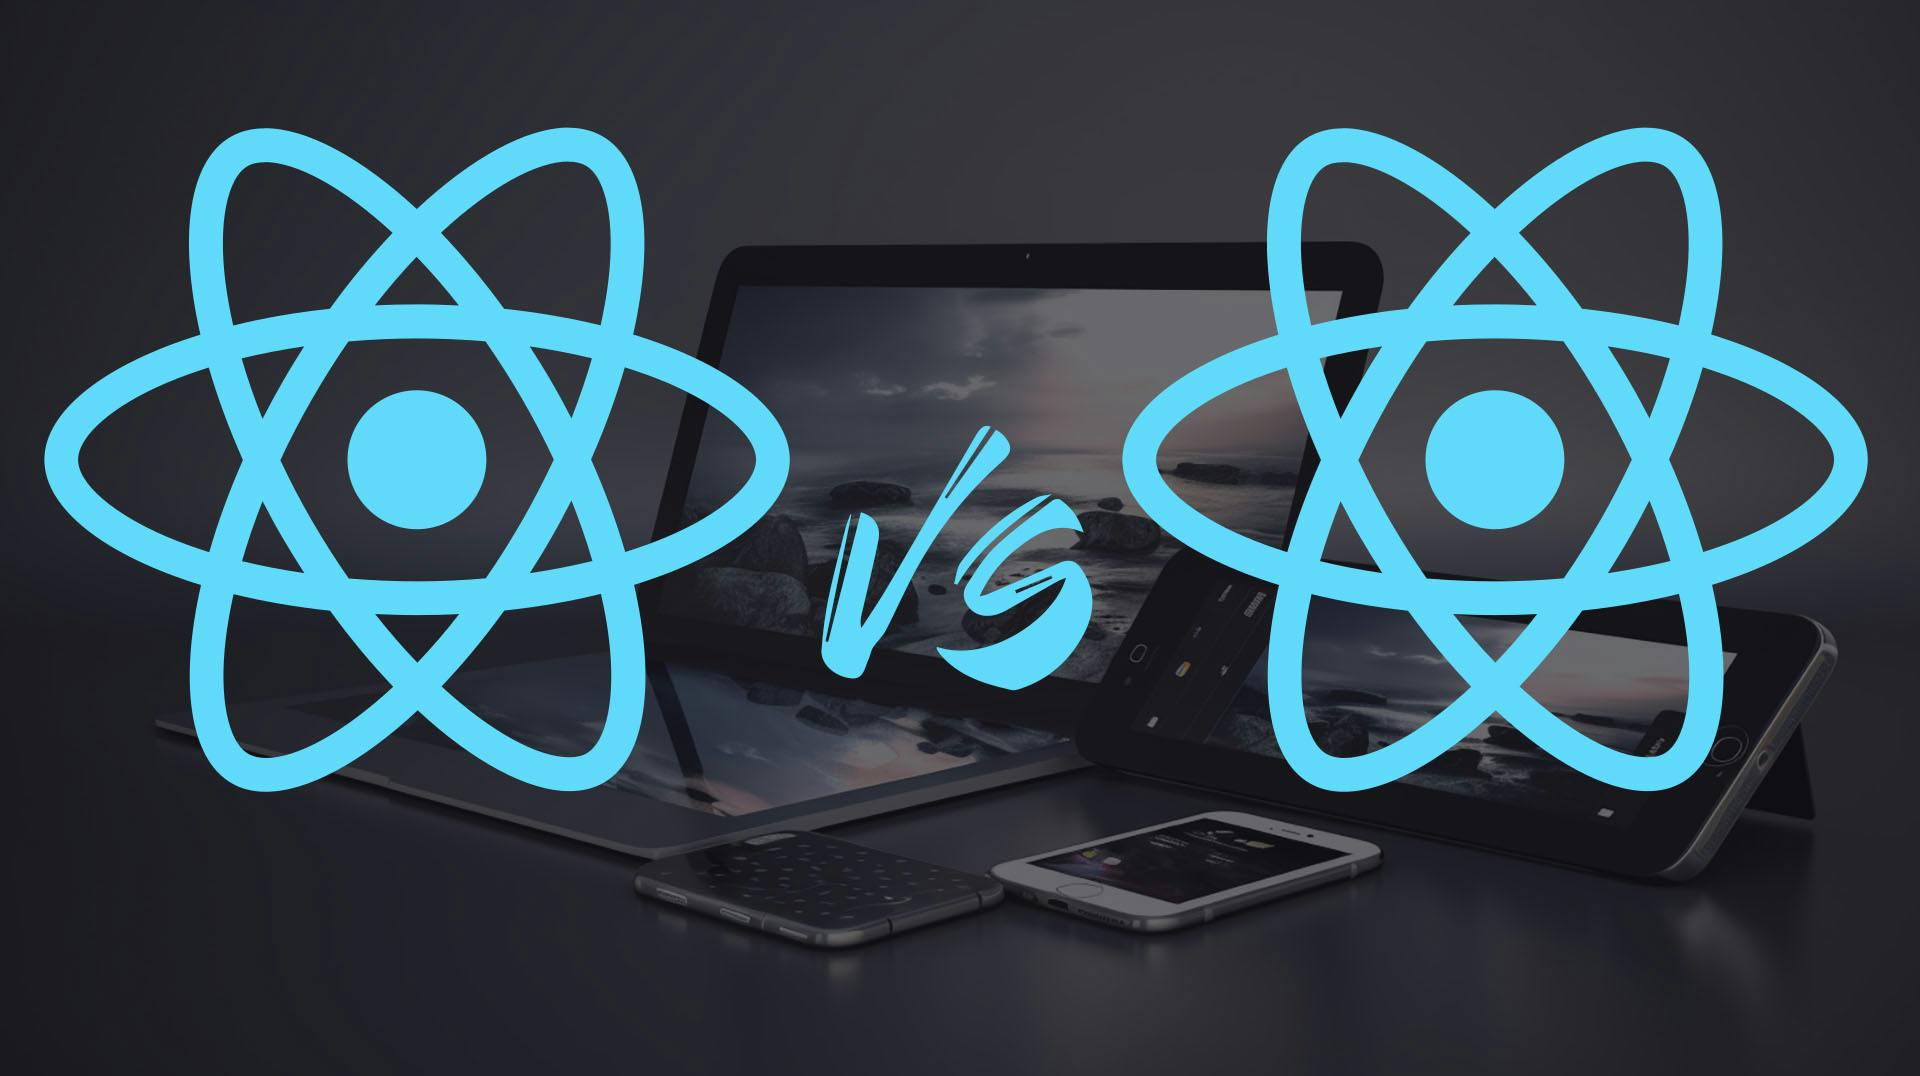 Which of React.js and React Native should you learn first? Which should you use in what circumstances?